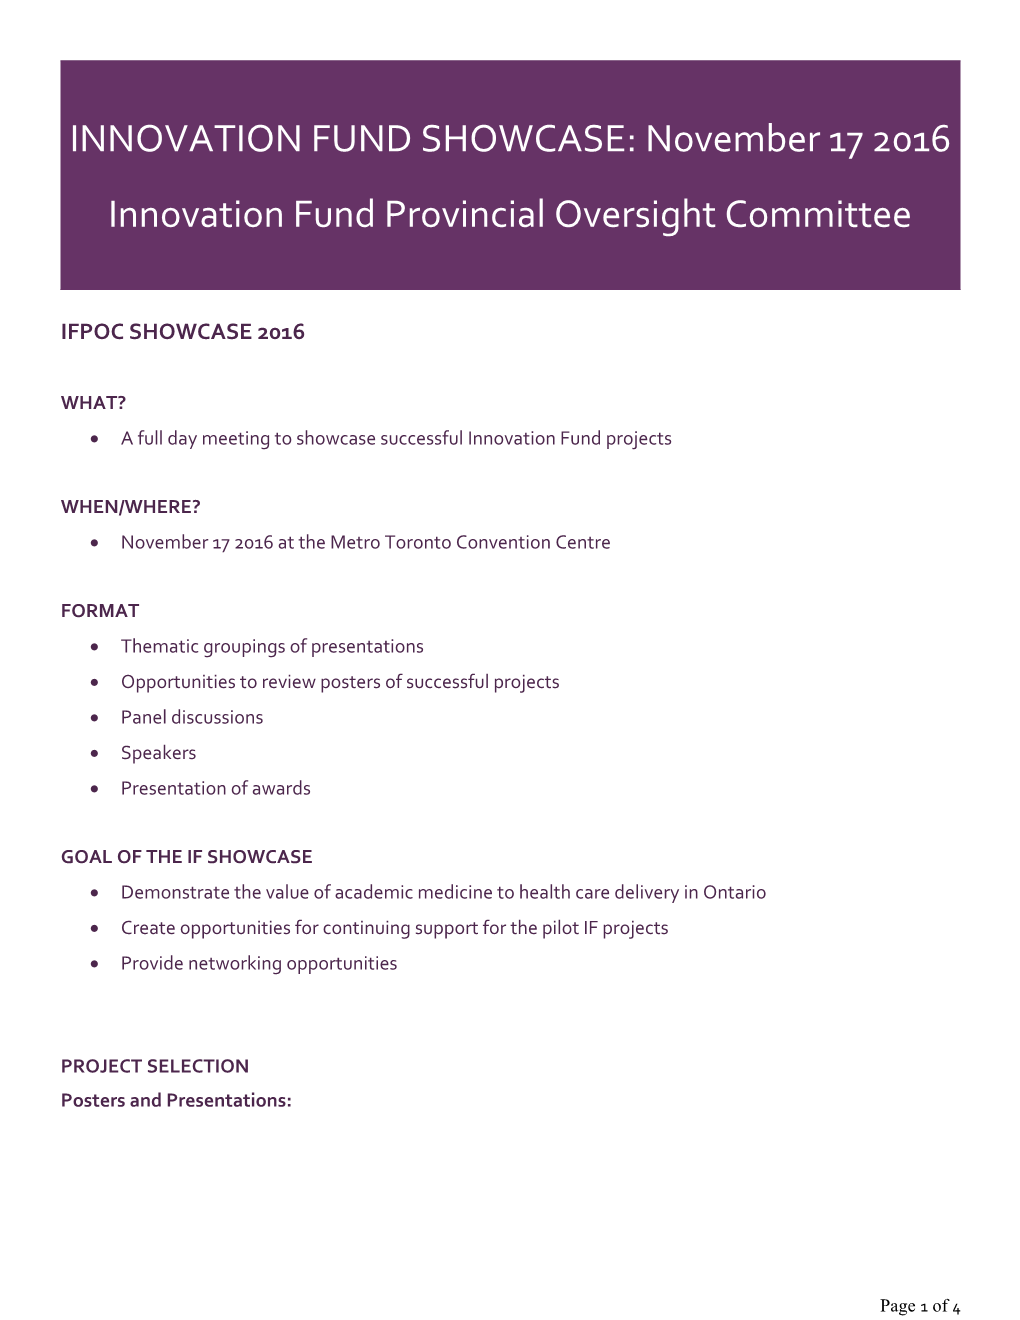 Innovation Fund Provincial Oversight Committee